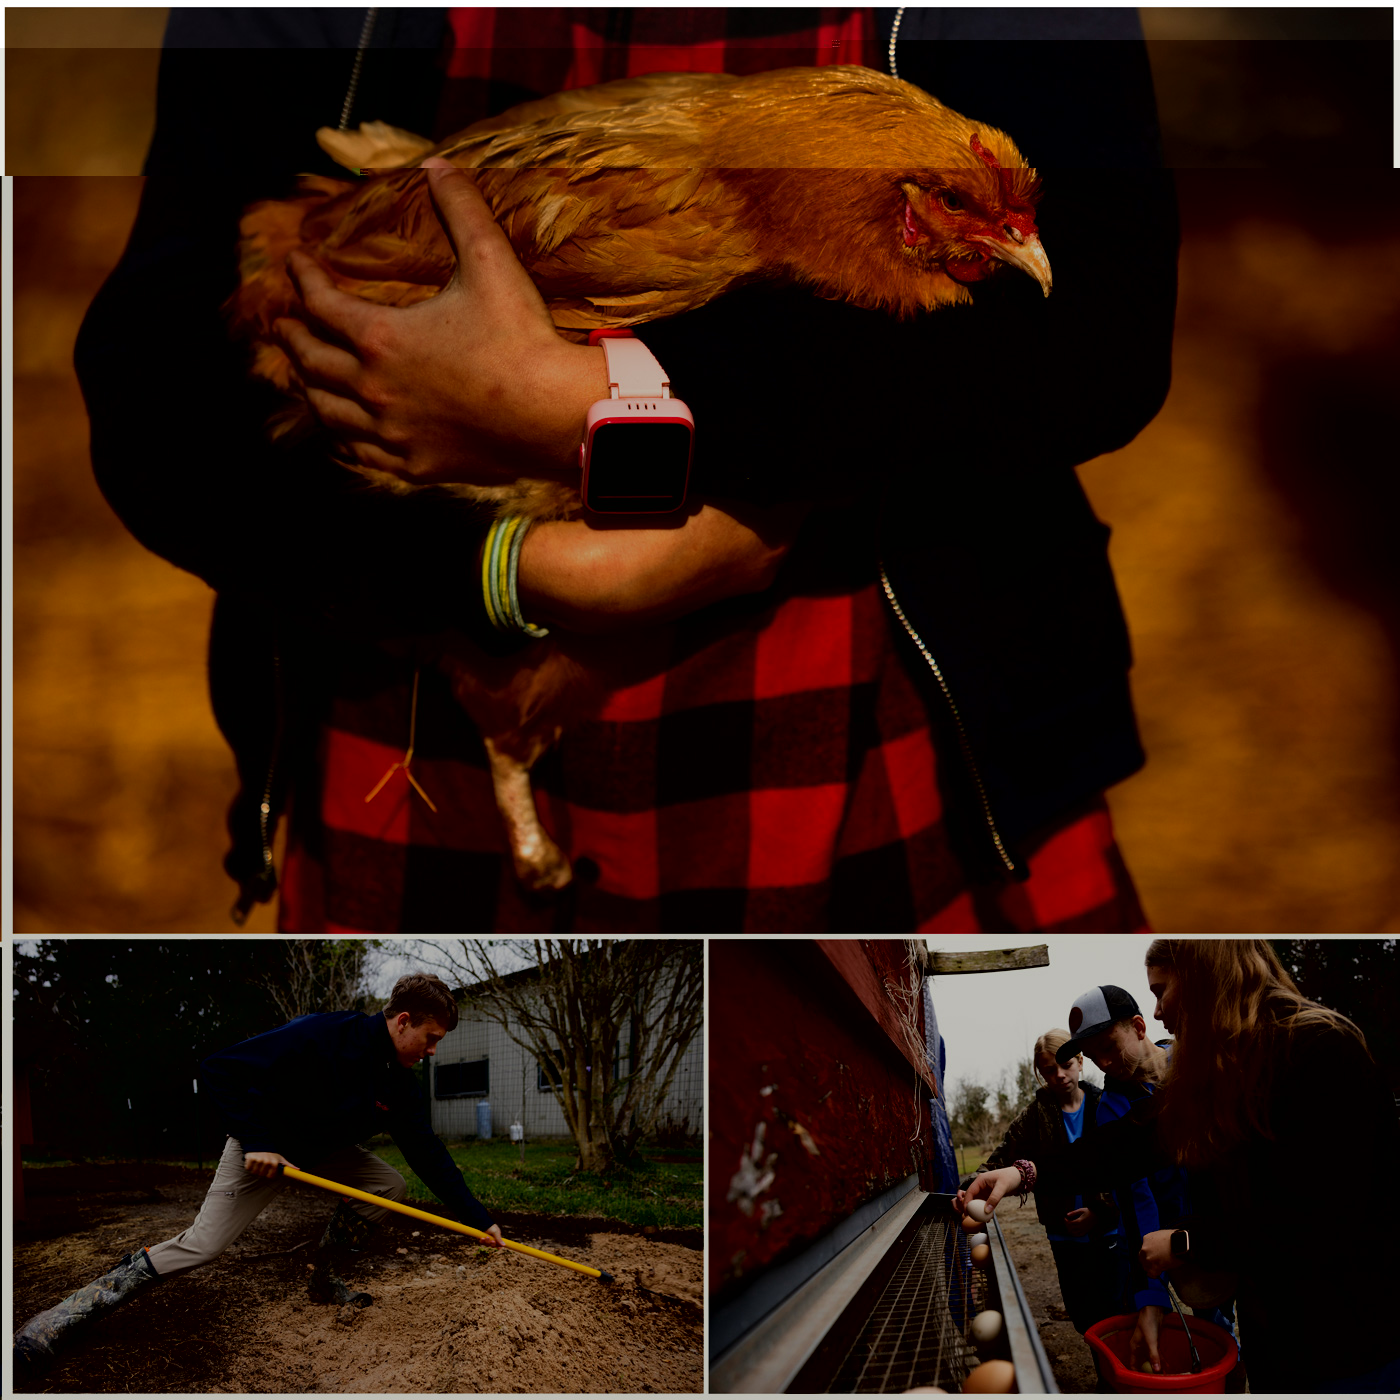 Top: Bernadette Clements, 11, also known as “Chicken Whisperer” holds Legolas, a chicken who lost her foot. Left: Dominic, 18, spread dry dirt on the muddy ground of a chicken run. Right: Bernadette Clements, 11, JohnPaul Clements, 13, and Veronica Clements, 14, three of five siblings responsible for running Clements Family Farm in Santa Fe, pick up eggs early Monday, Jan. 30, 2023, in Santa Fe.